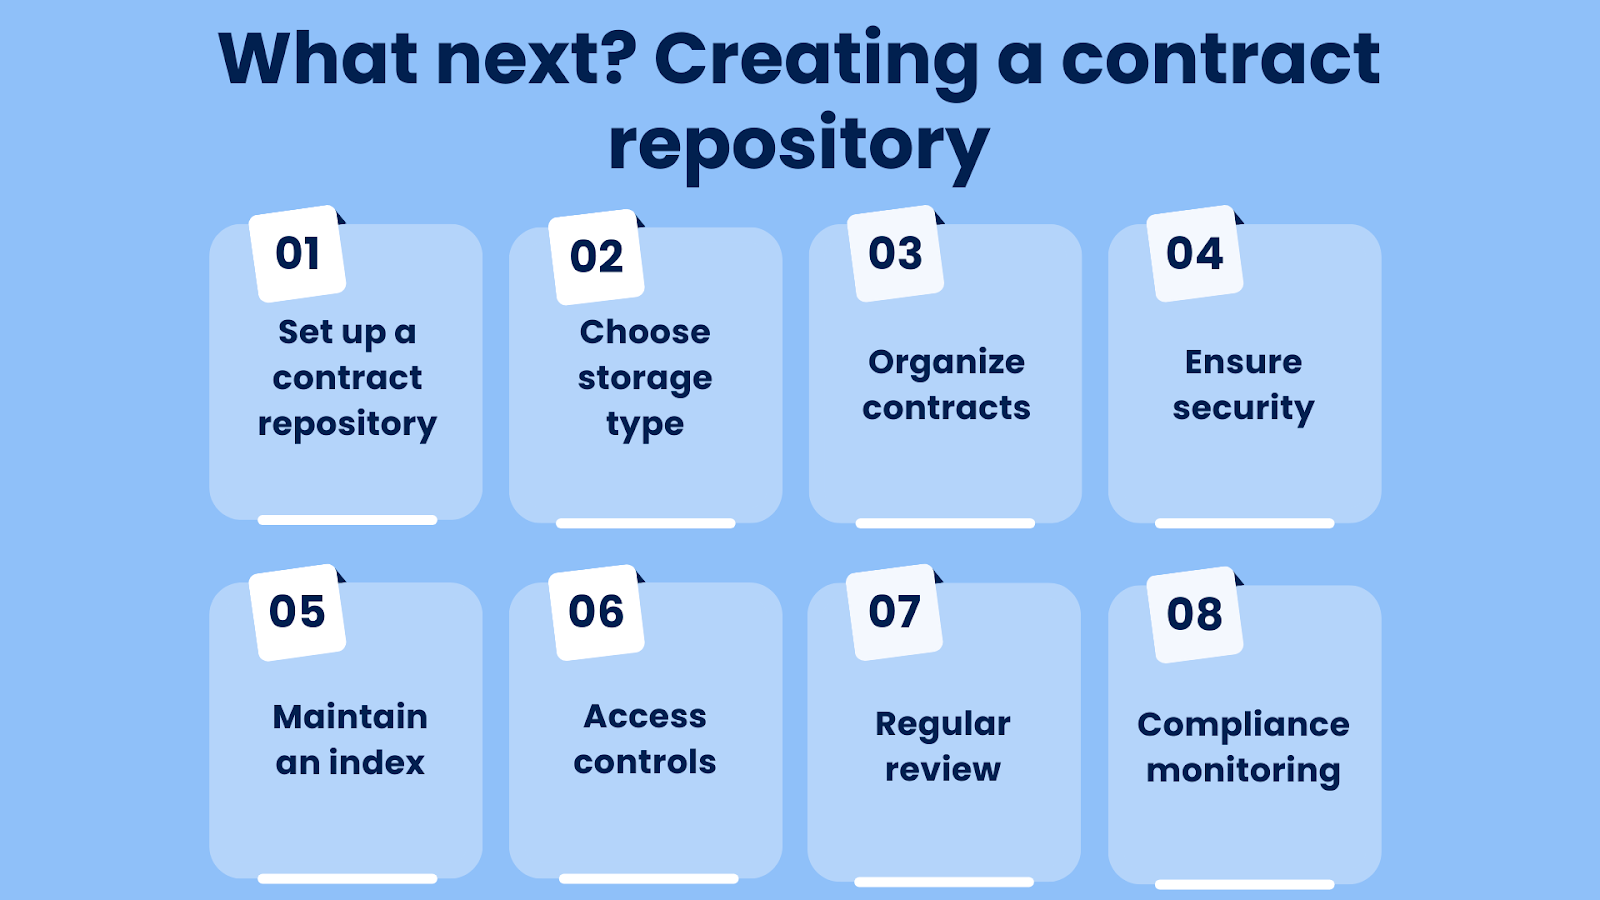 How to create a contract repository